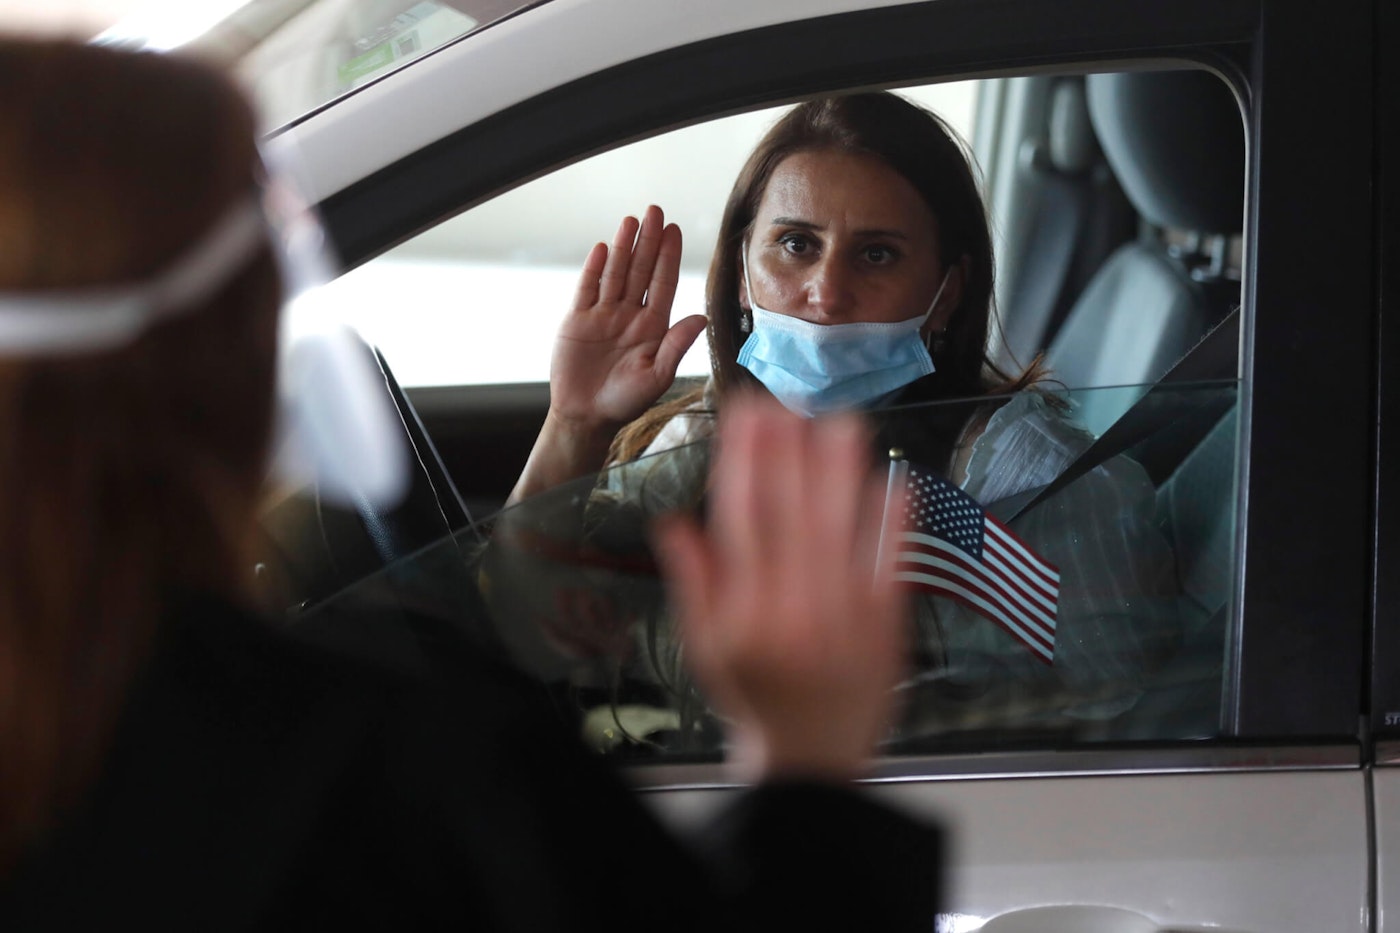 In this Friday, June 26, 2020 photo, U.S. District Judge Laurie Michelson, left, administers the Oath of Citizenship to Hala Baqtar during a drive-thru naturalization service in a parking structure at the U.S. Citizenship and Immigration Services headquarters on Detroit's east side. The ceremony is a way to continue working as the federal courthouse is shut down due to Coronavirus. The U.S. has resumed swearing in new citizens but the oath ceremonies aren't the same because of COVID-19 and a budget crisis at the citizenship agency threatens to stall them again.  (AP Photo/Carlos Osorio)